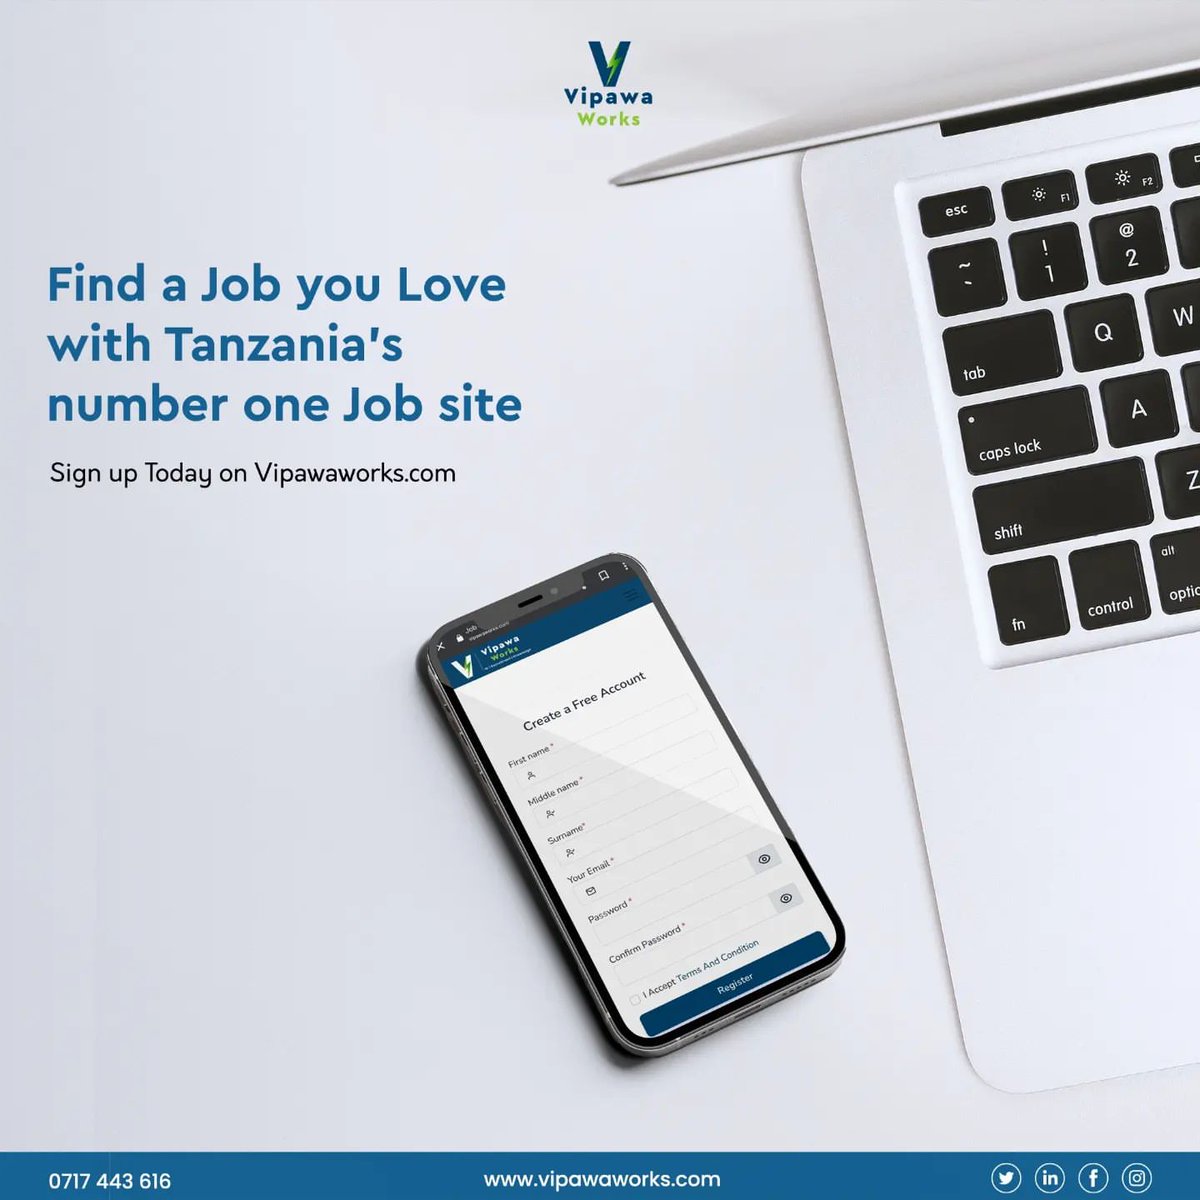 Did you know in order to apply for any of our job vacancies , you have to be a registered candidate on our vipawaworks website?

visit vipawaworks.com to register with us

#vipawaworks #ajira #kazi #recruitment #recruitinglife #staffing #executivesearch #headhunt #career